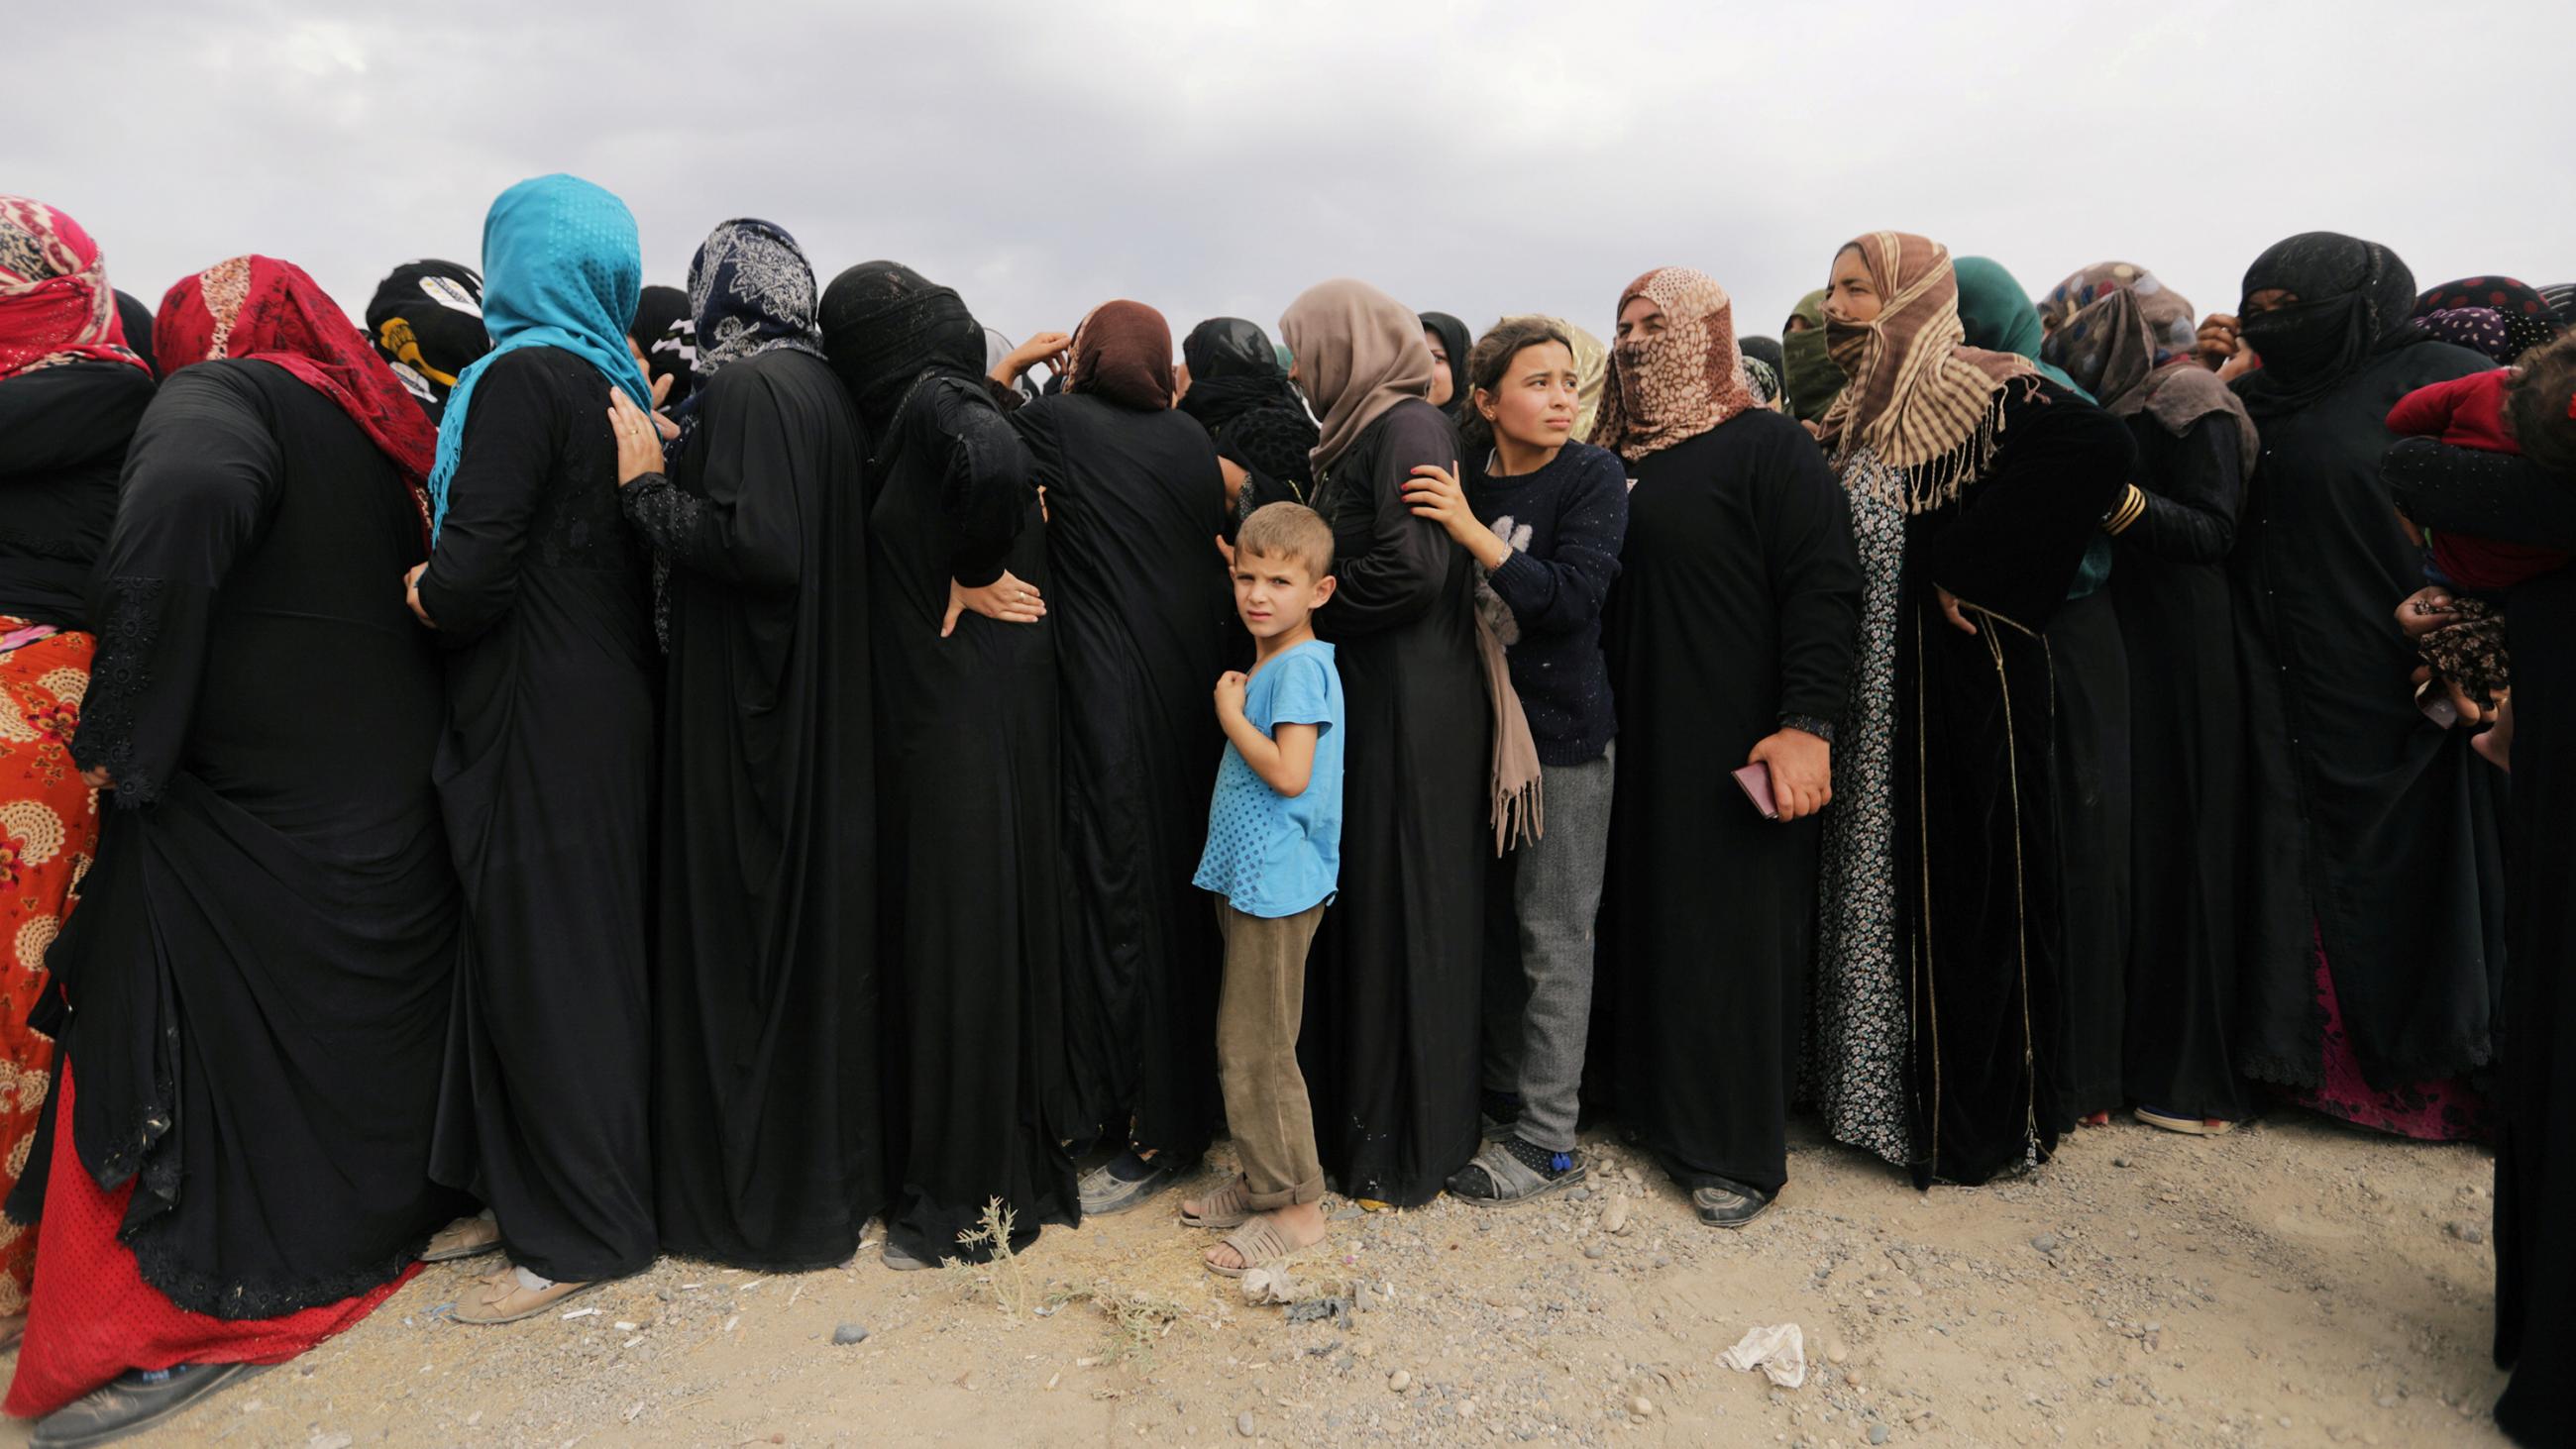 The photo shows a line of mostly women, all in black coverings, with a single boy in a light blue shirt in line with them. It is striking because his shirt stands out against a sea of black. 